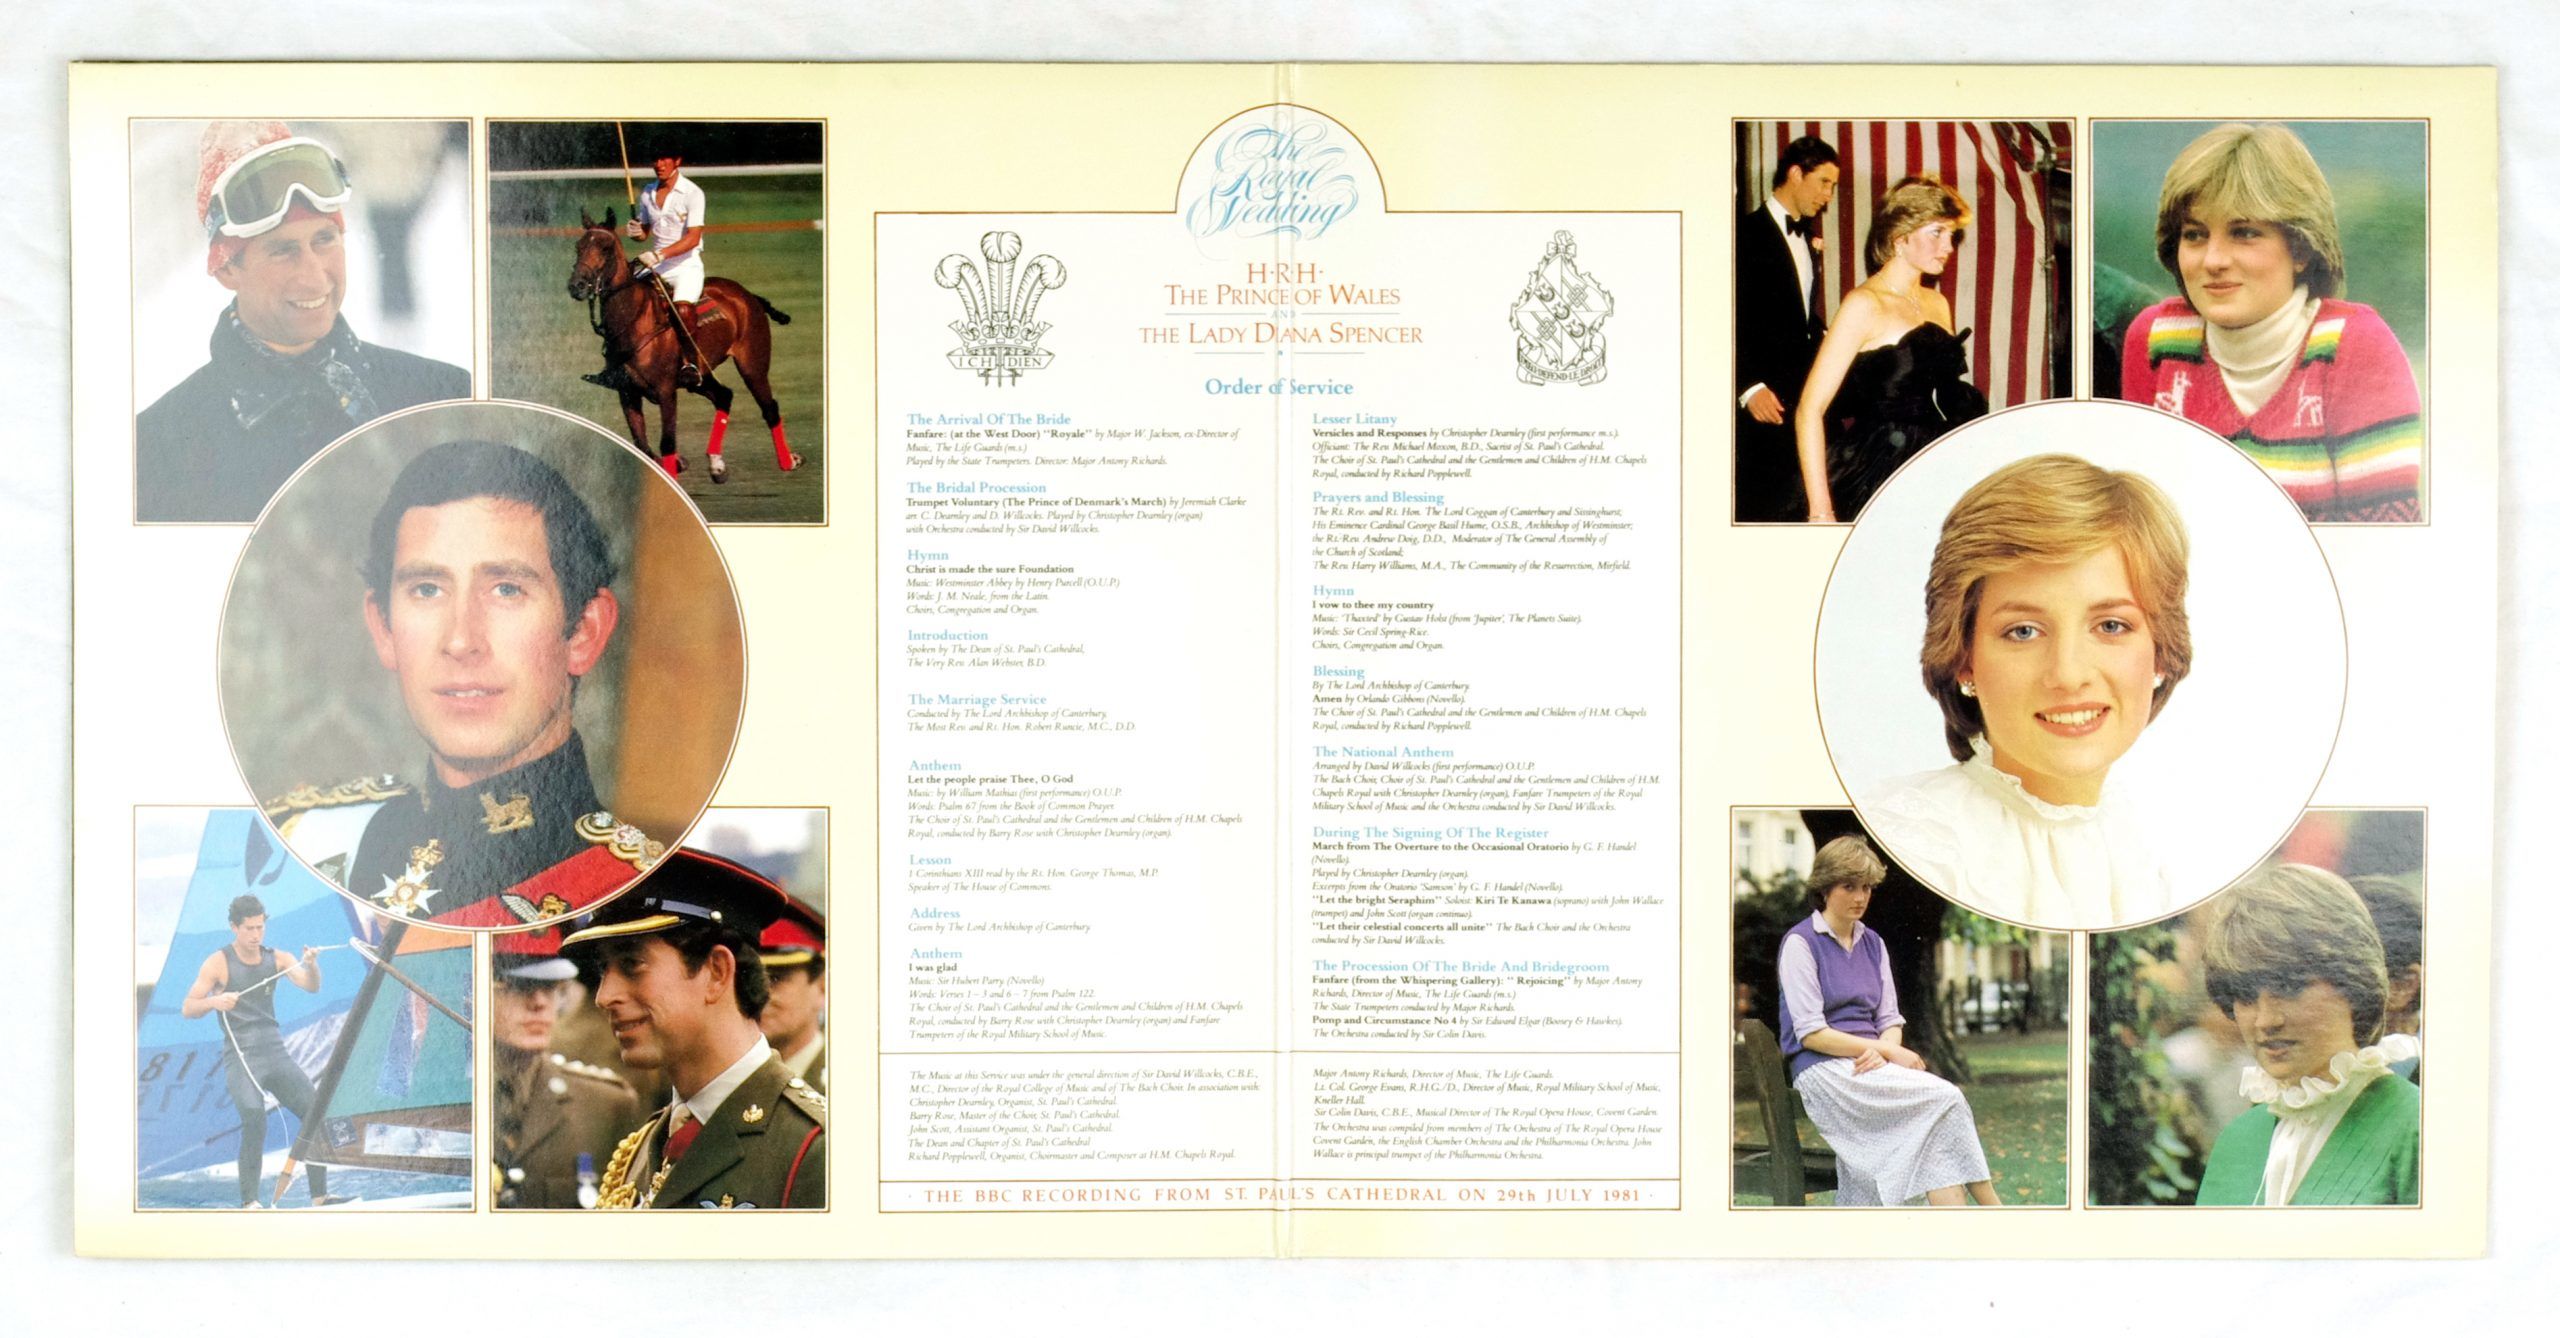 The Royal Wedding Of H.R.H. The Prince Of Wales And The Lady Diana Spencer Vinyl 1981